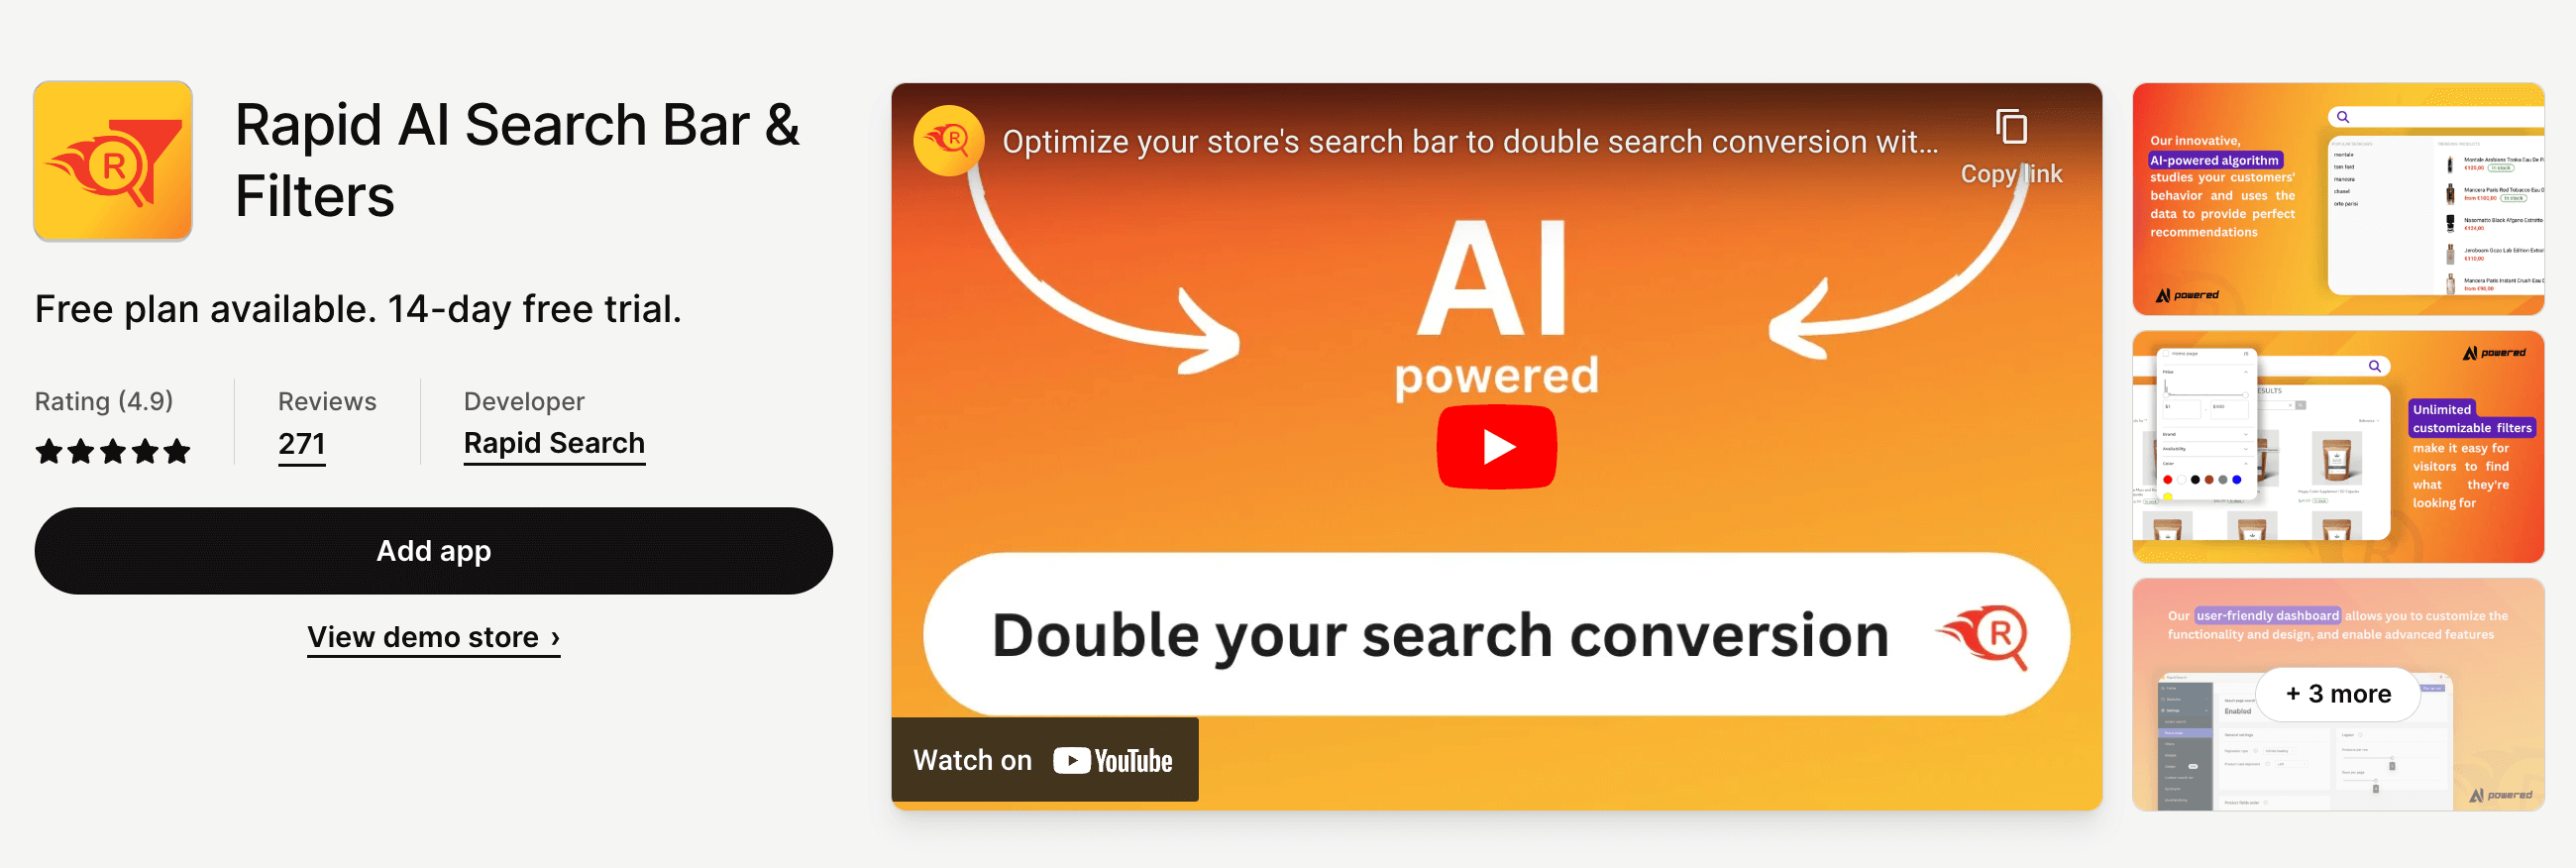 Rapid AI Search Bar & Filters